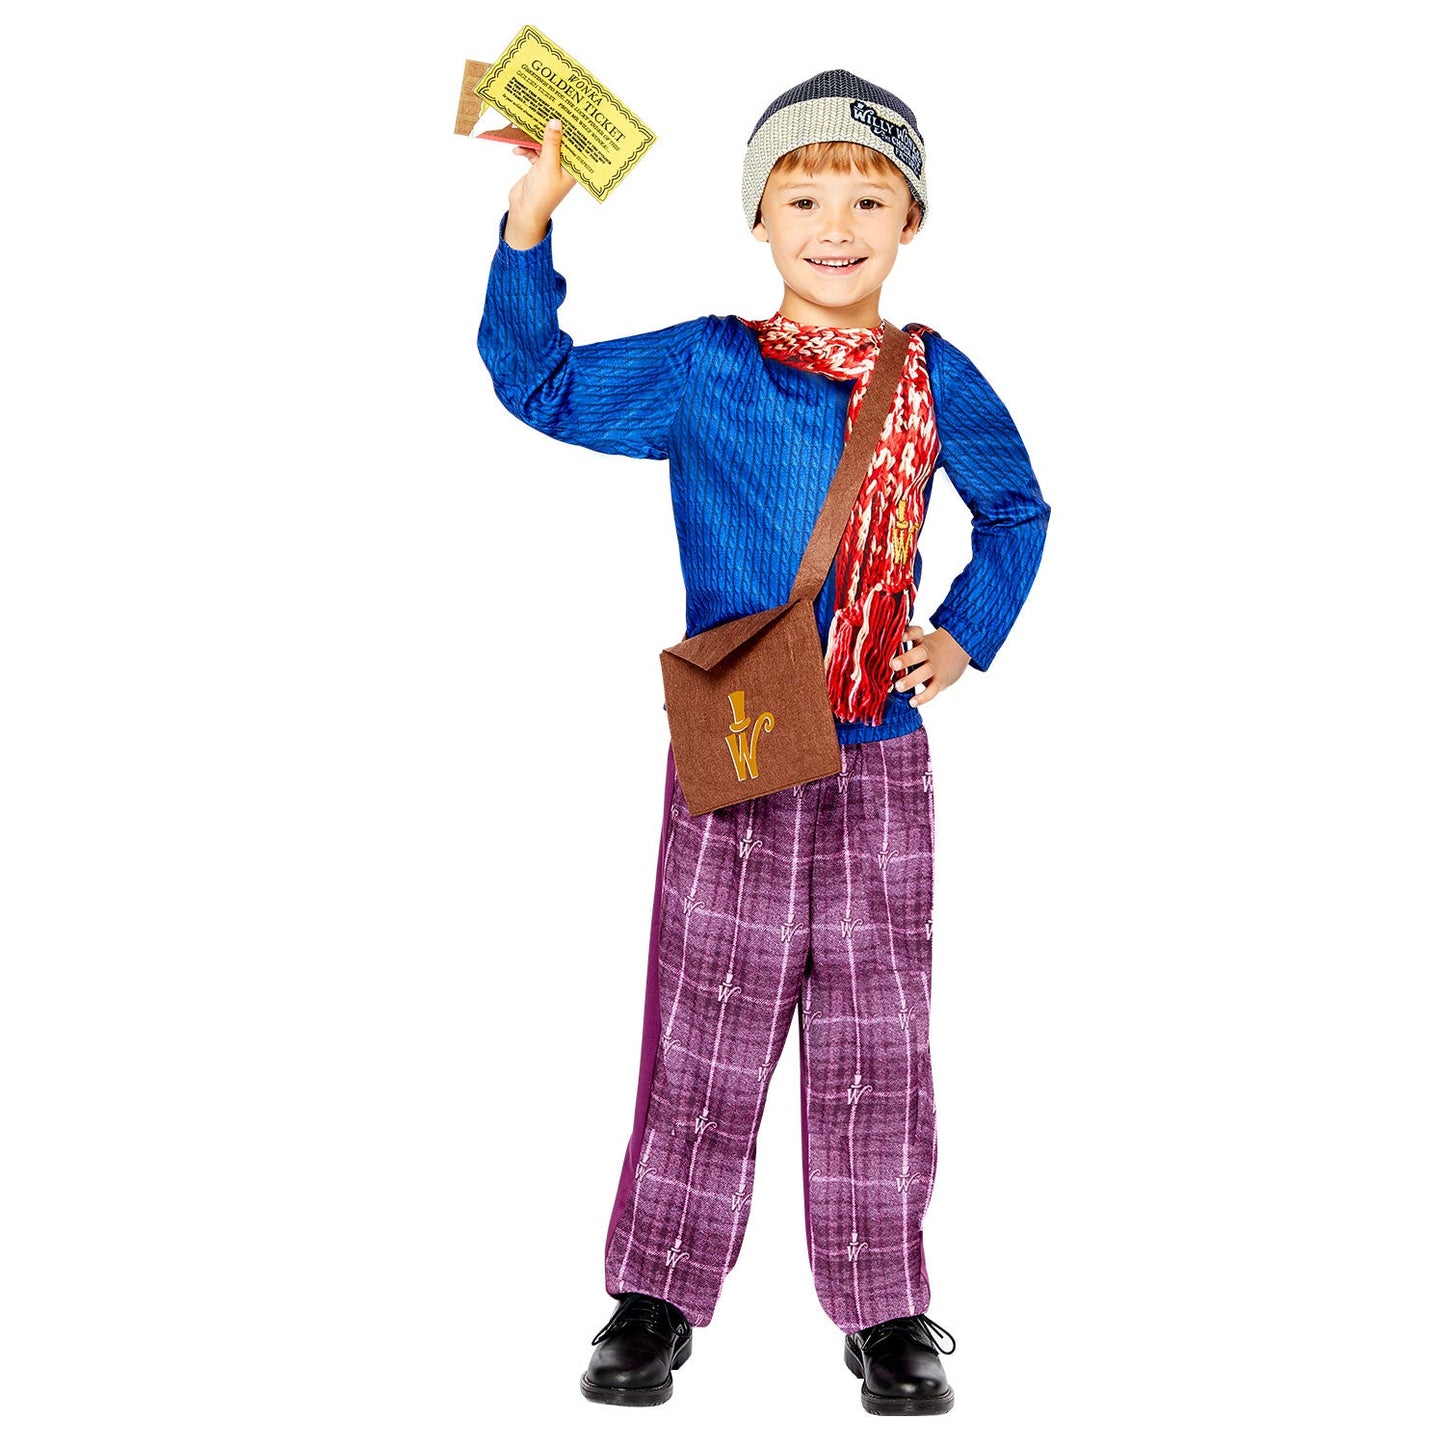 Charlie Bucket Costume includes printed top| trousers| hat| bag with felt golden ticket| wonka bar and invite